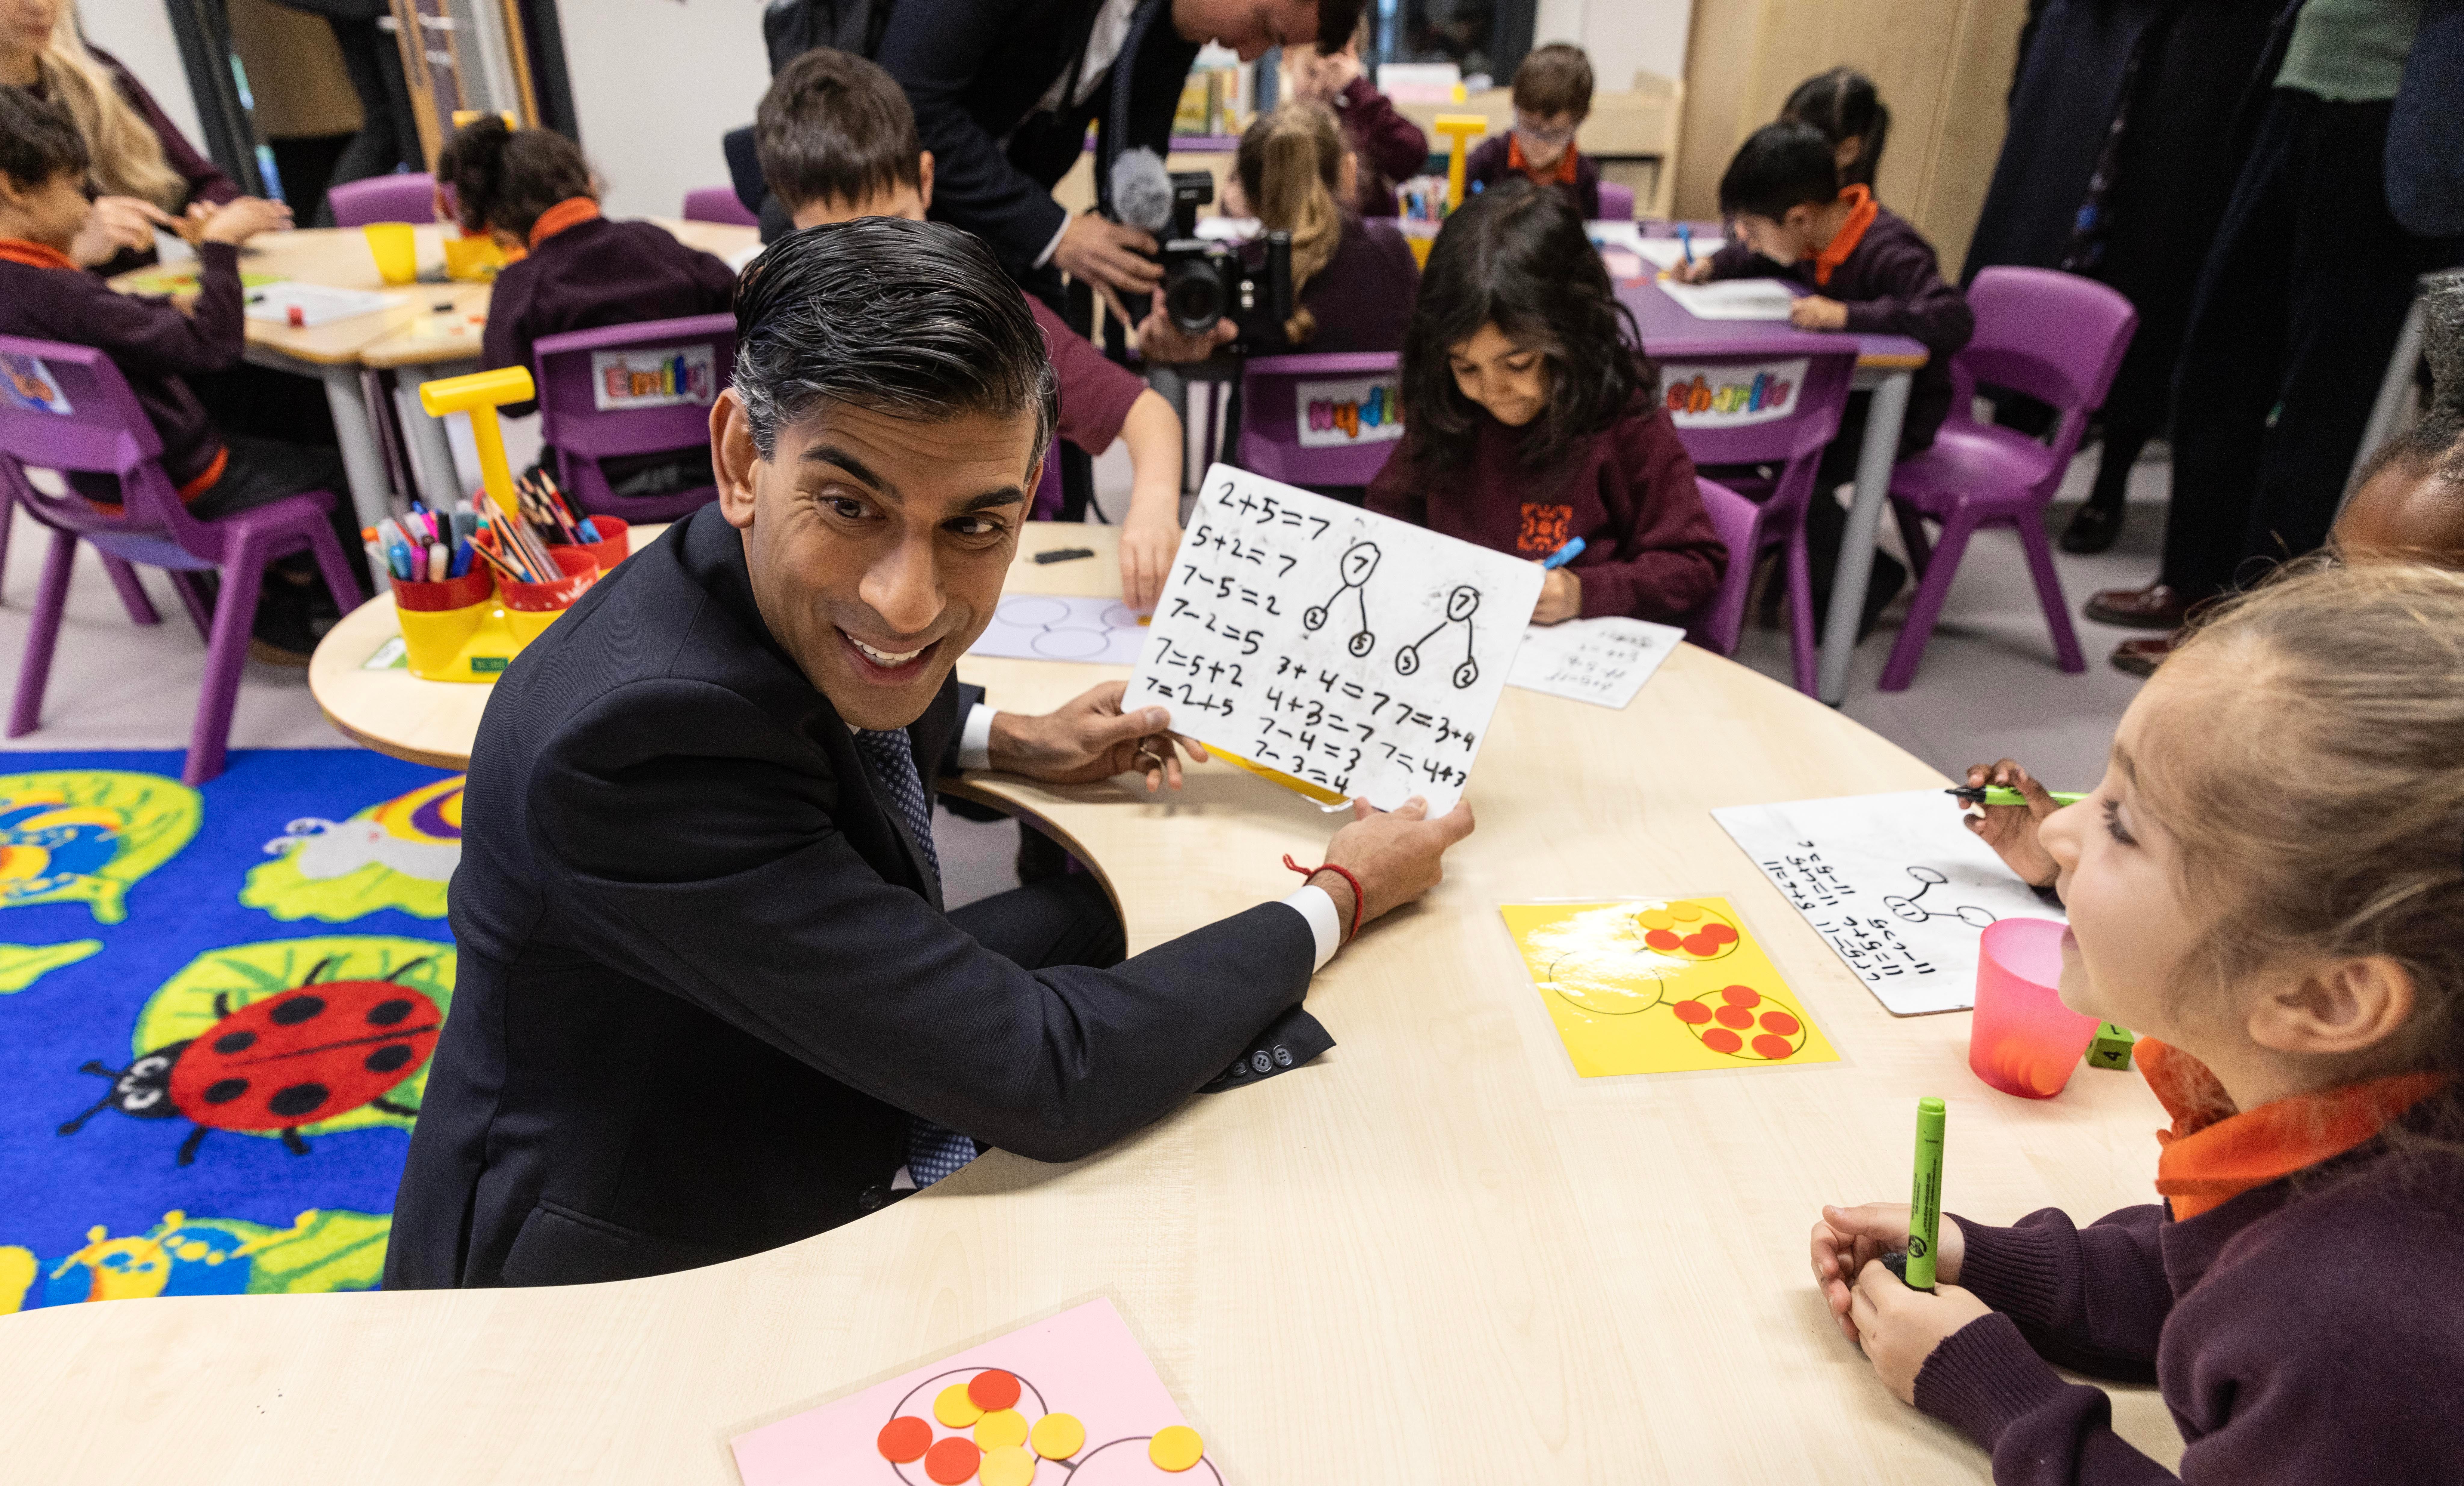 There’s sum thing about Rishi: The prime minister visits the Wren Academy, in Finchley, London